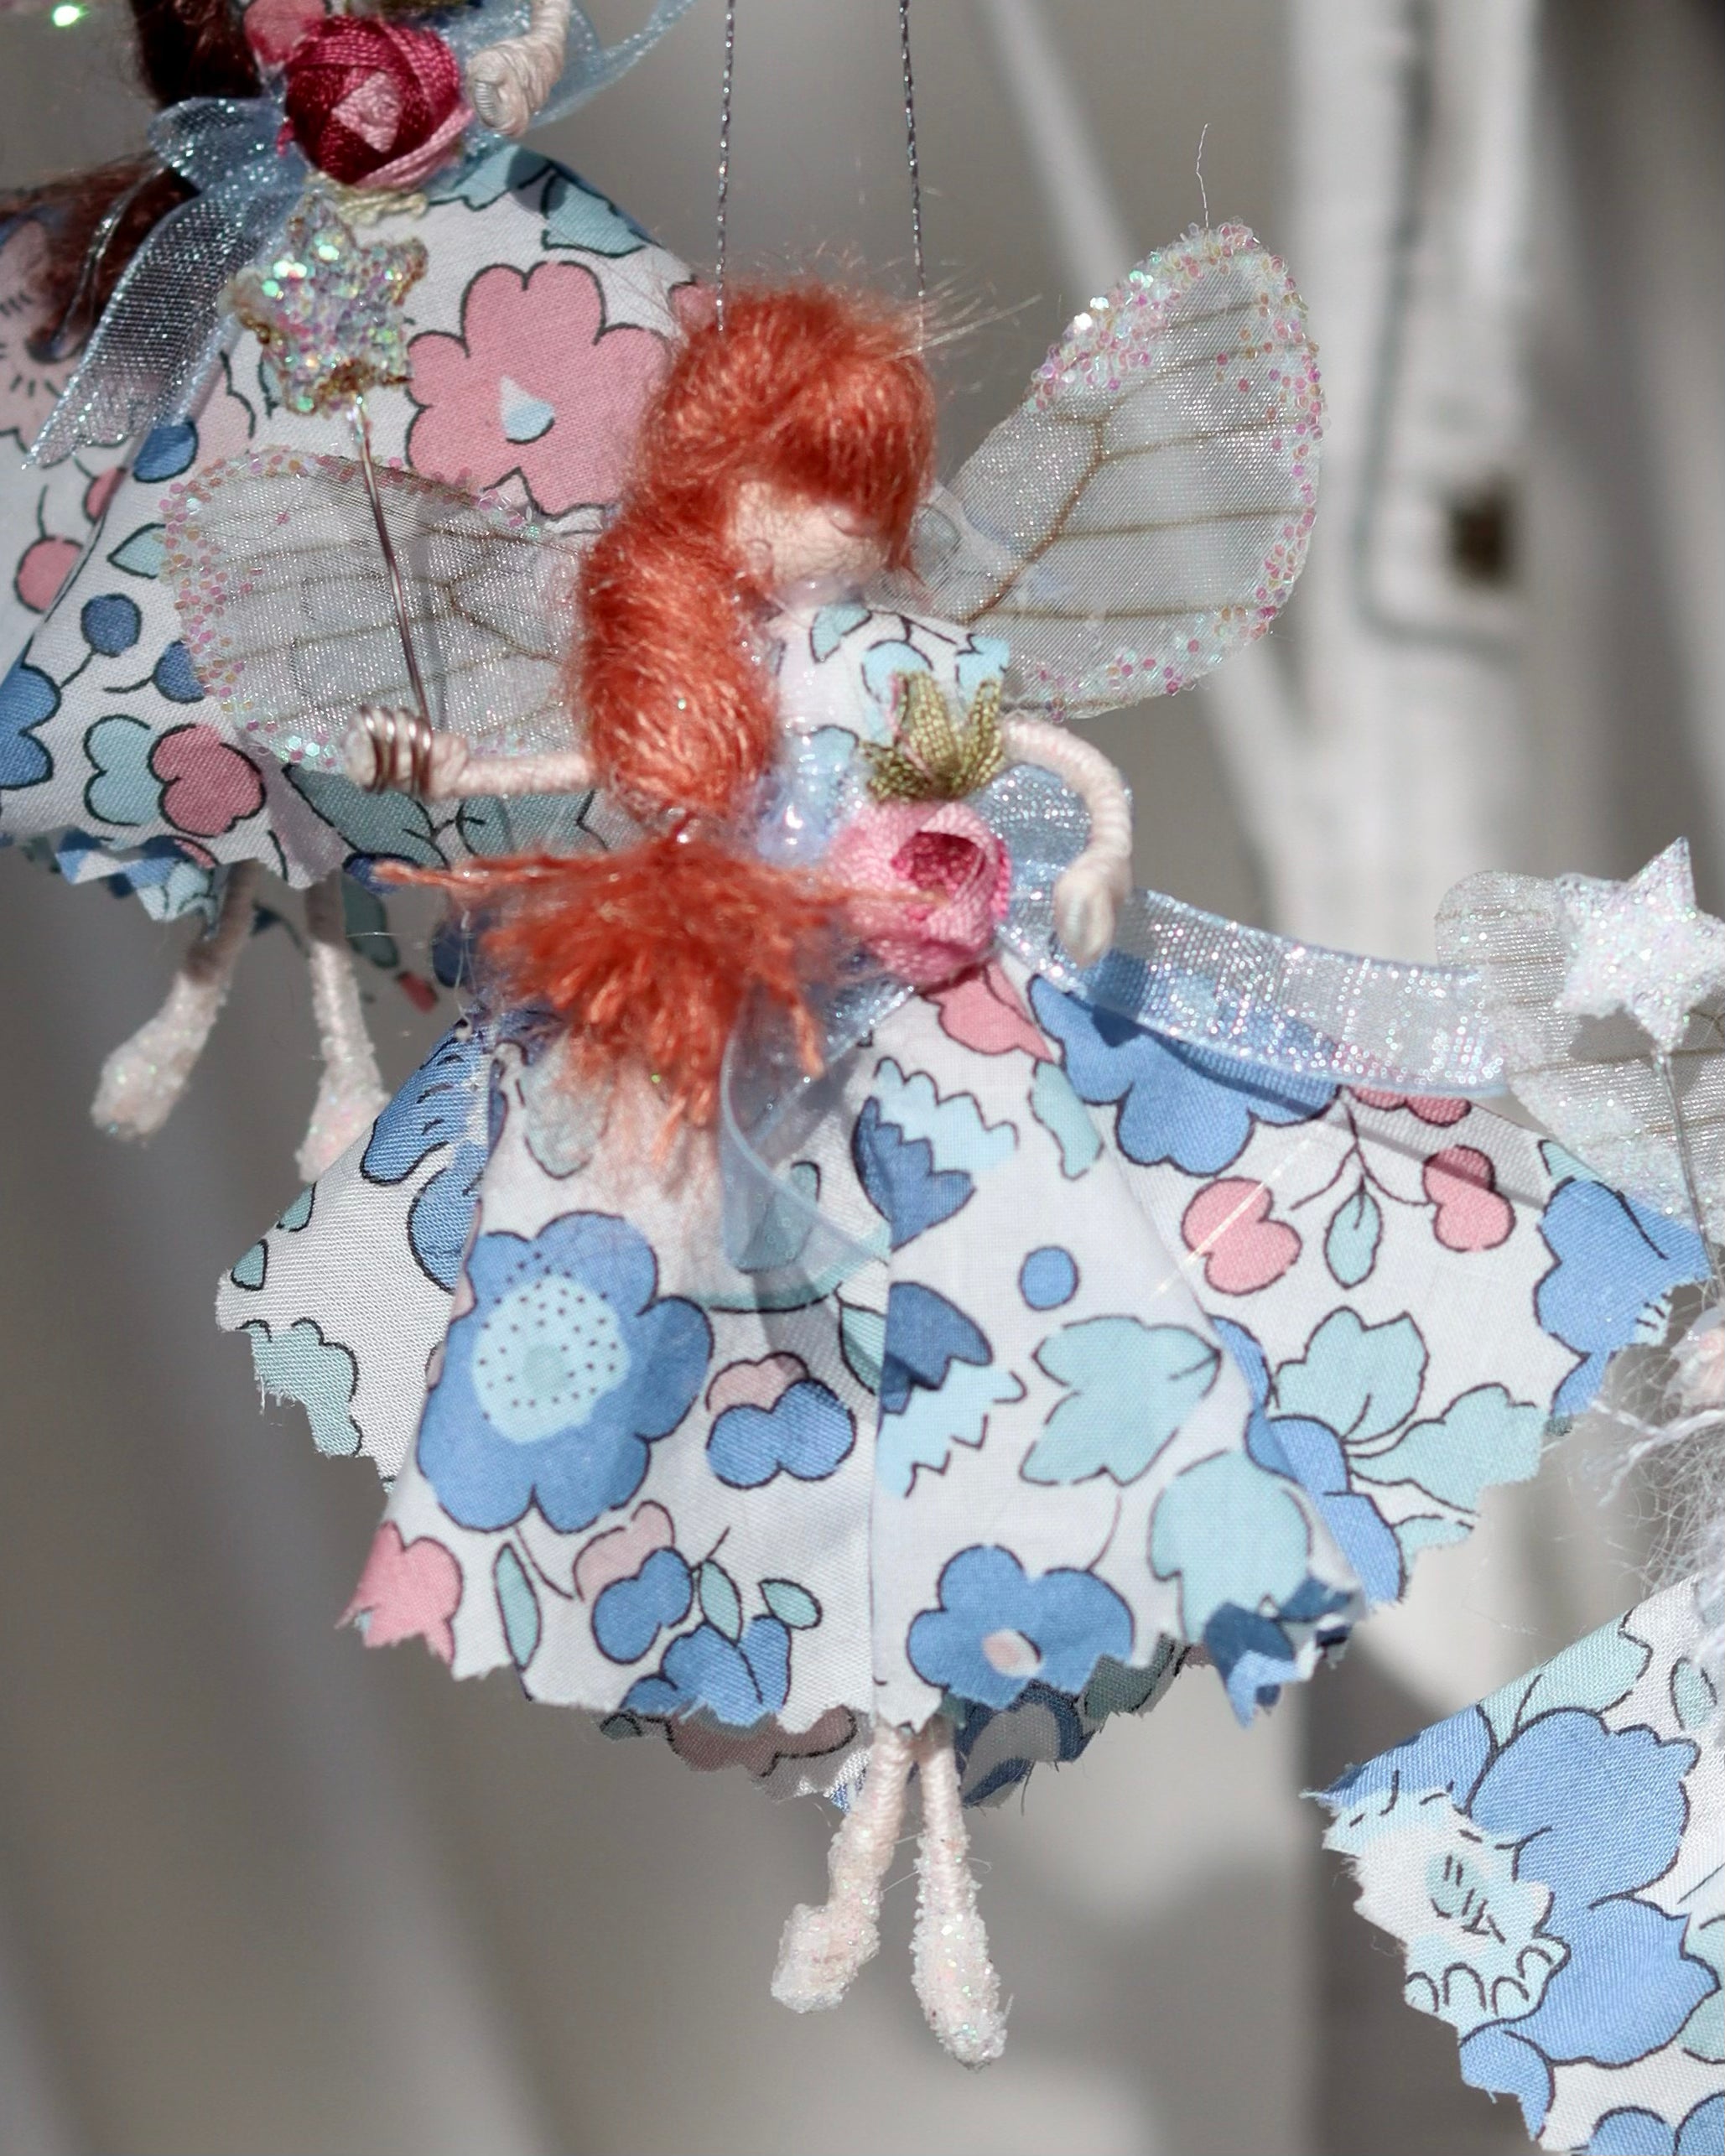 This little fairy is dressed in the “Betsy” Liberty print fabric. She has sashed her gown at the waist with a pale pink Organza ribbon and a little rose trim. Her little shoes are dipped in glitter. Her delicate wings are made from silk Organza and of course, her glittered wand